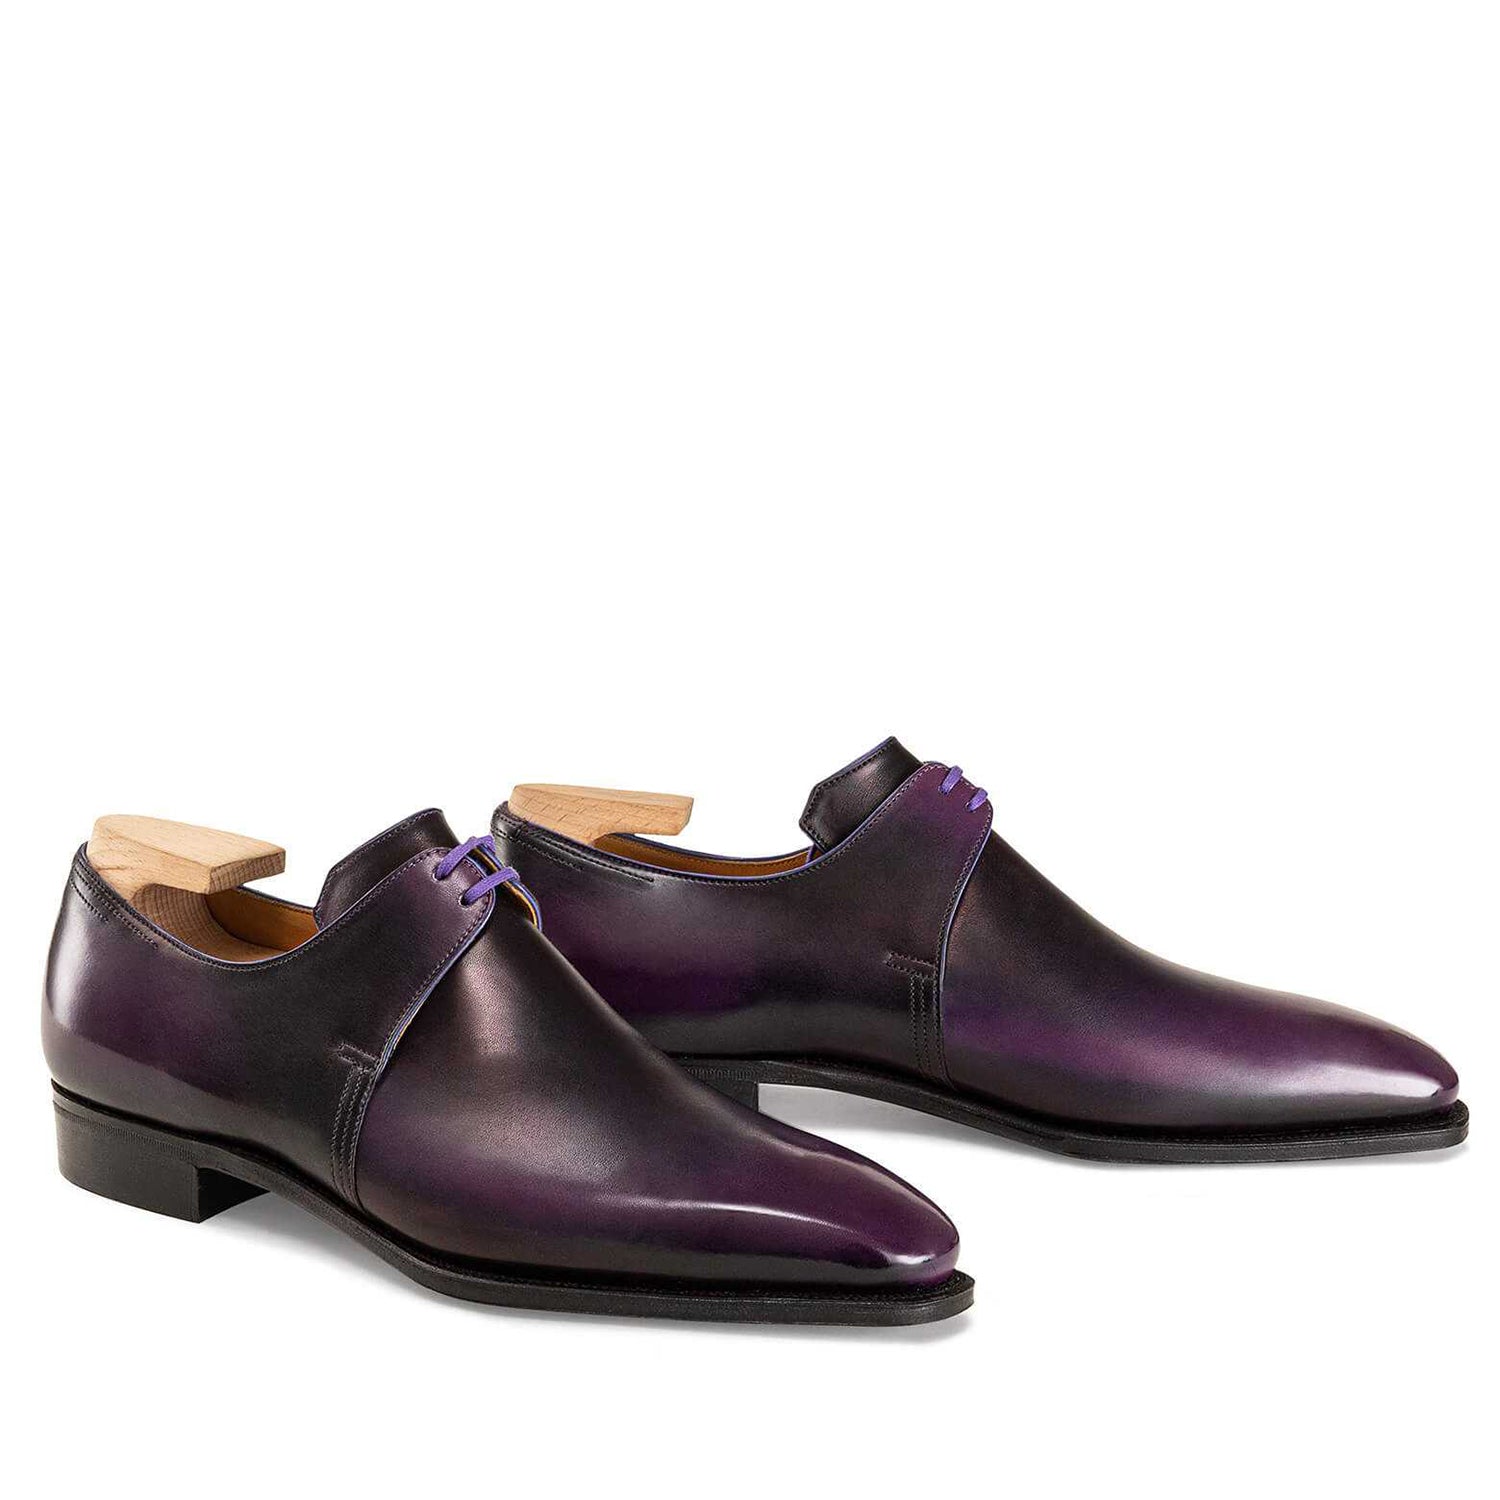 AUBERGINE CALF LEATHER SHOES